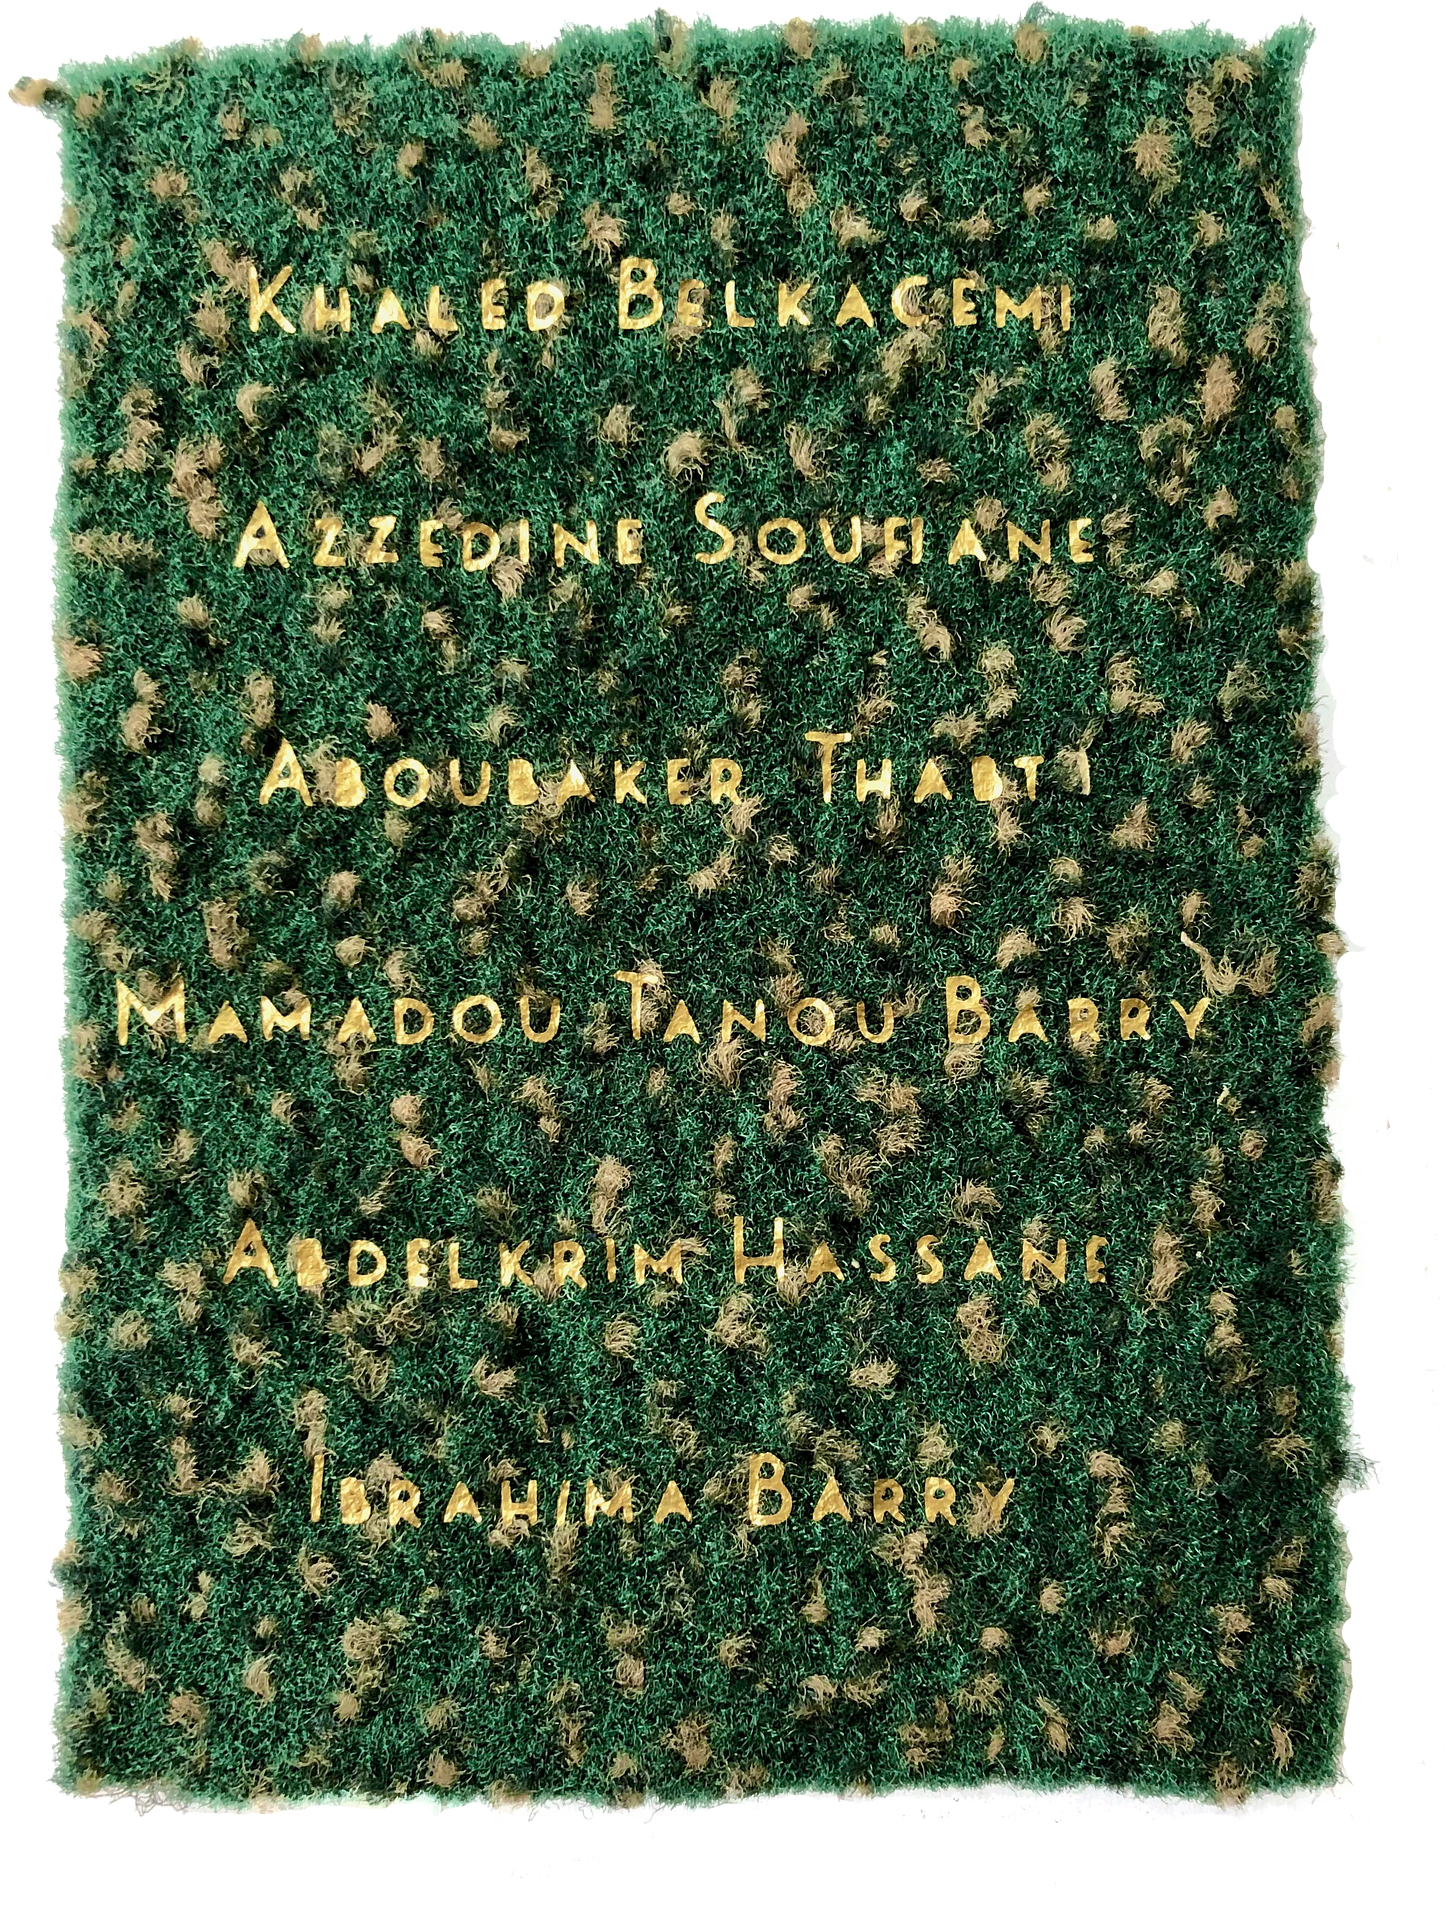 Names of Khaled Belkacemi, Azzedine Soufiane, Aboubakar Thabti, Mamadou Tanou Barry, Abdelkrim Hassane and Ibrahima Barry rendered in gold on a patch of carpet from the CCIQ Mosque in Quebec City